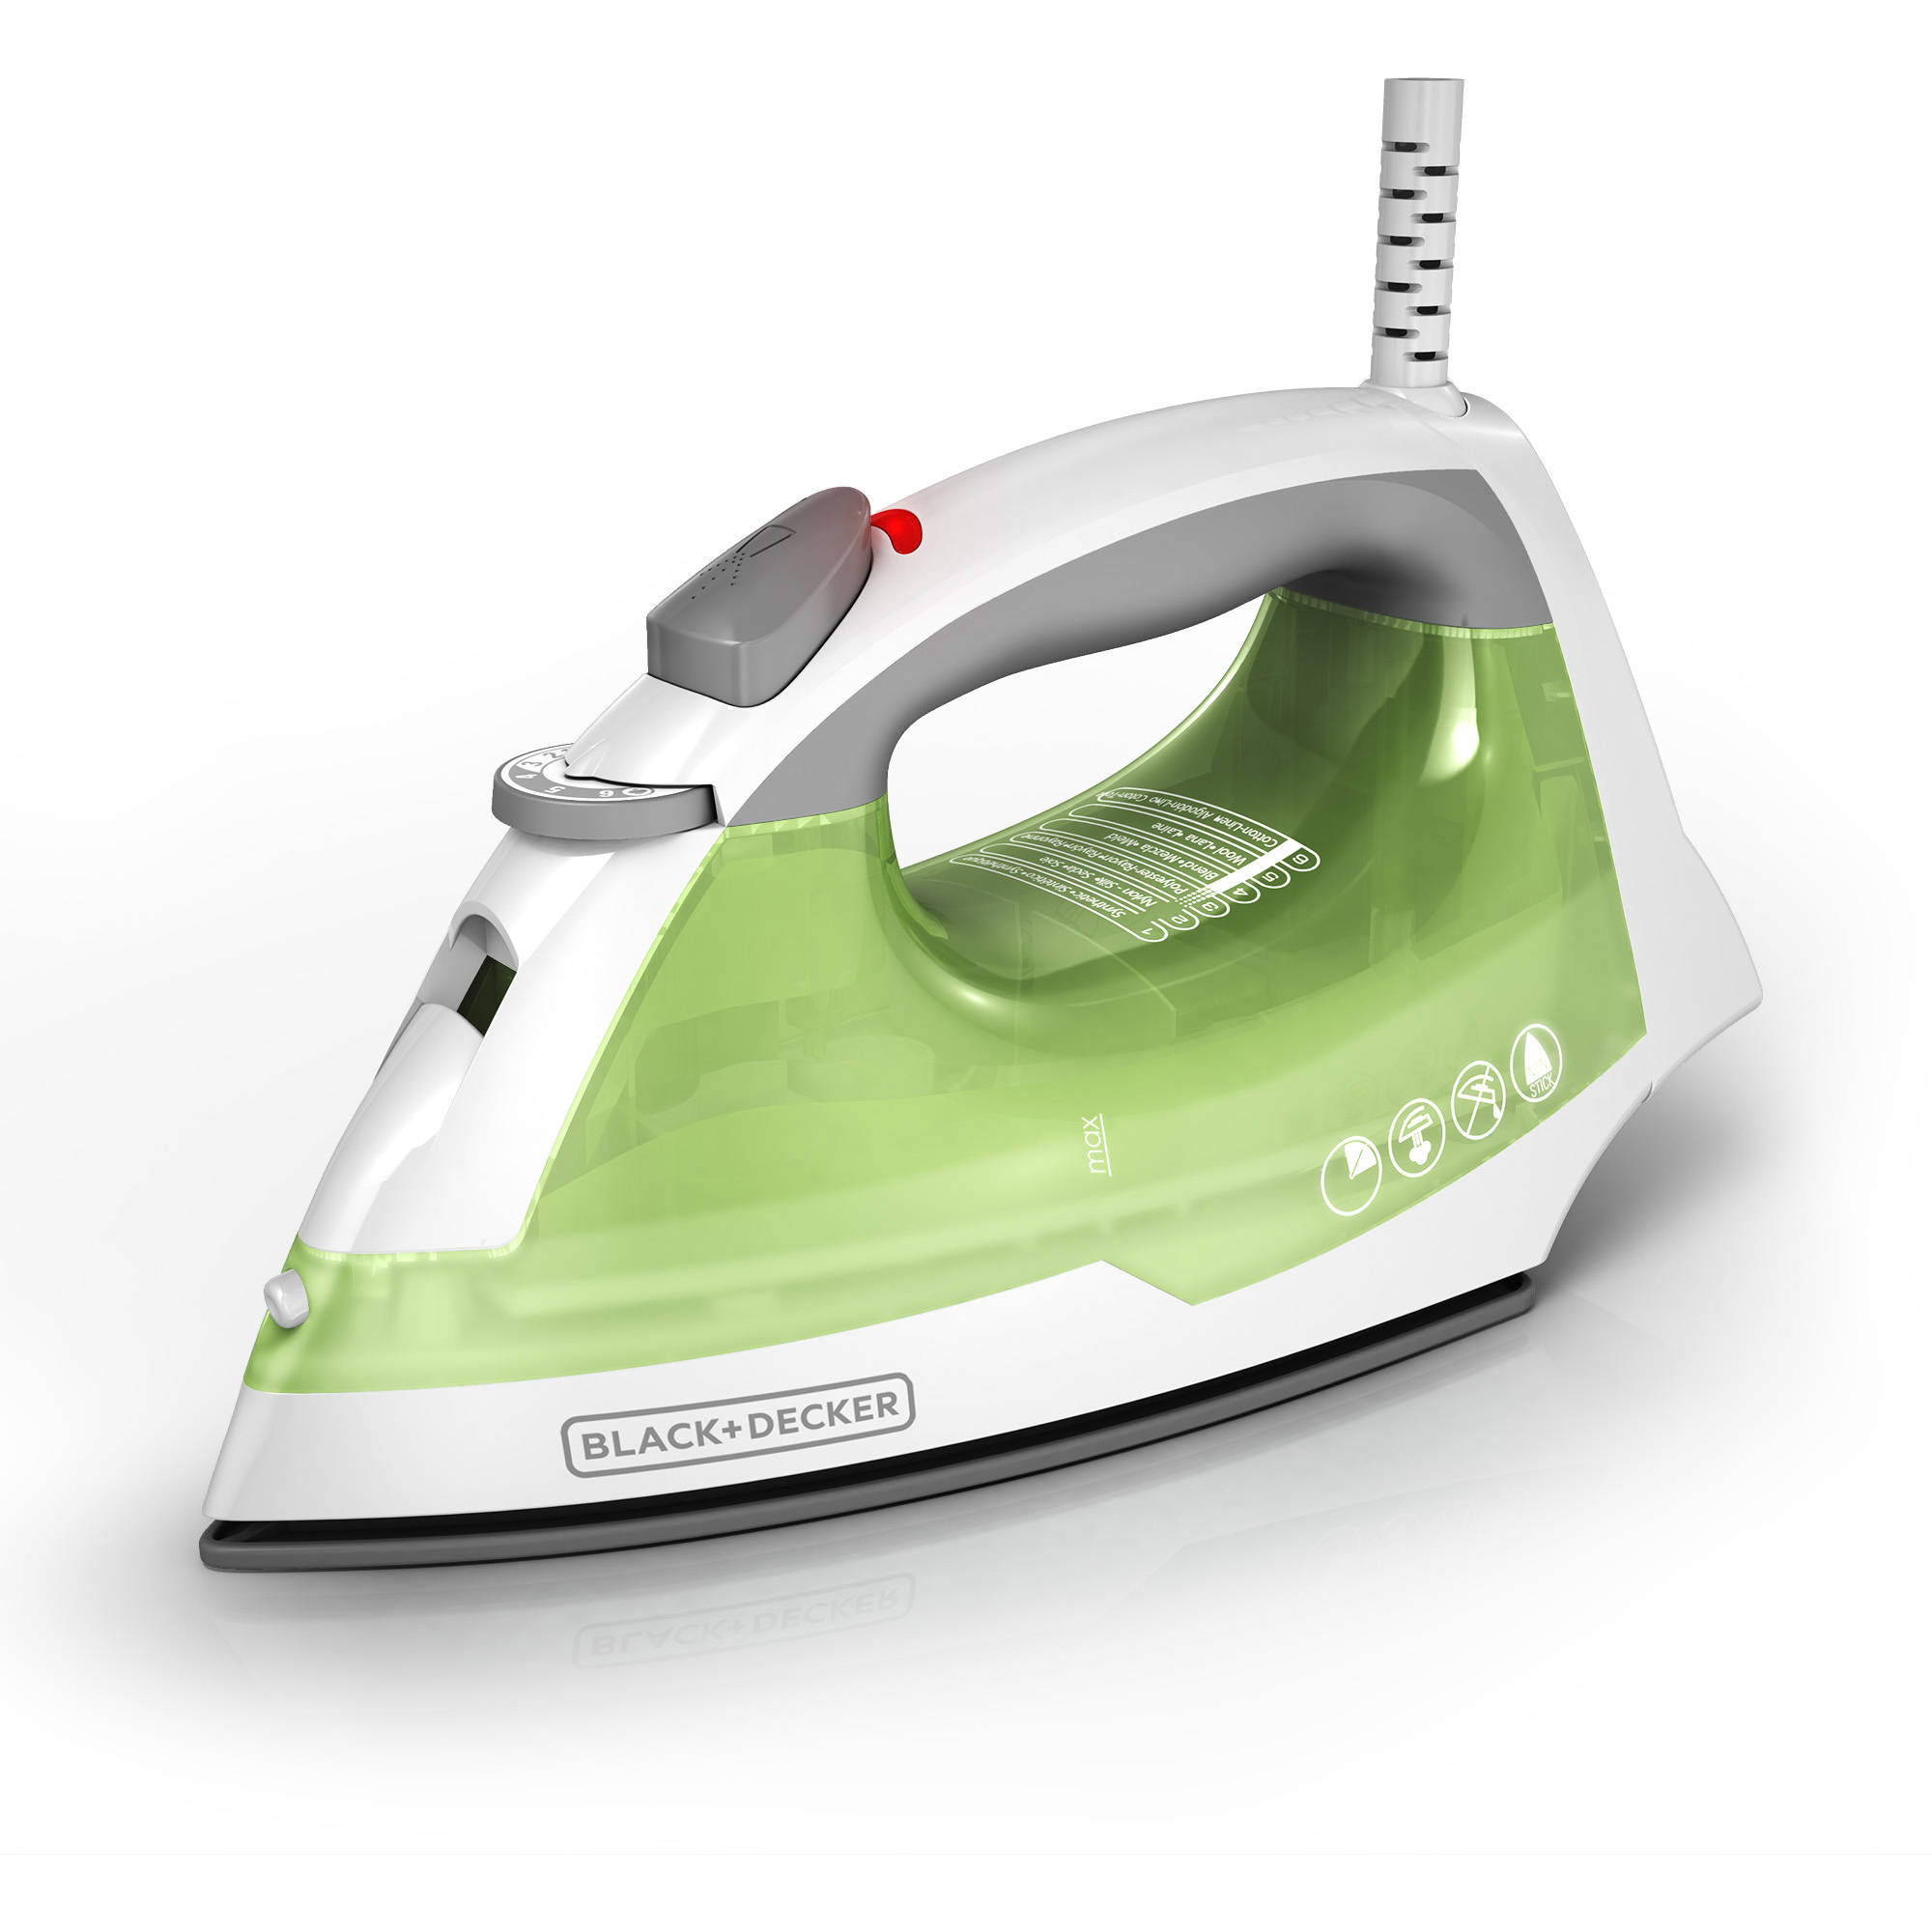 In-store: Black+Decker easy steam compact clothing iron for $10